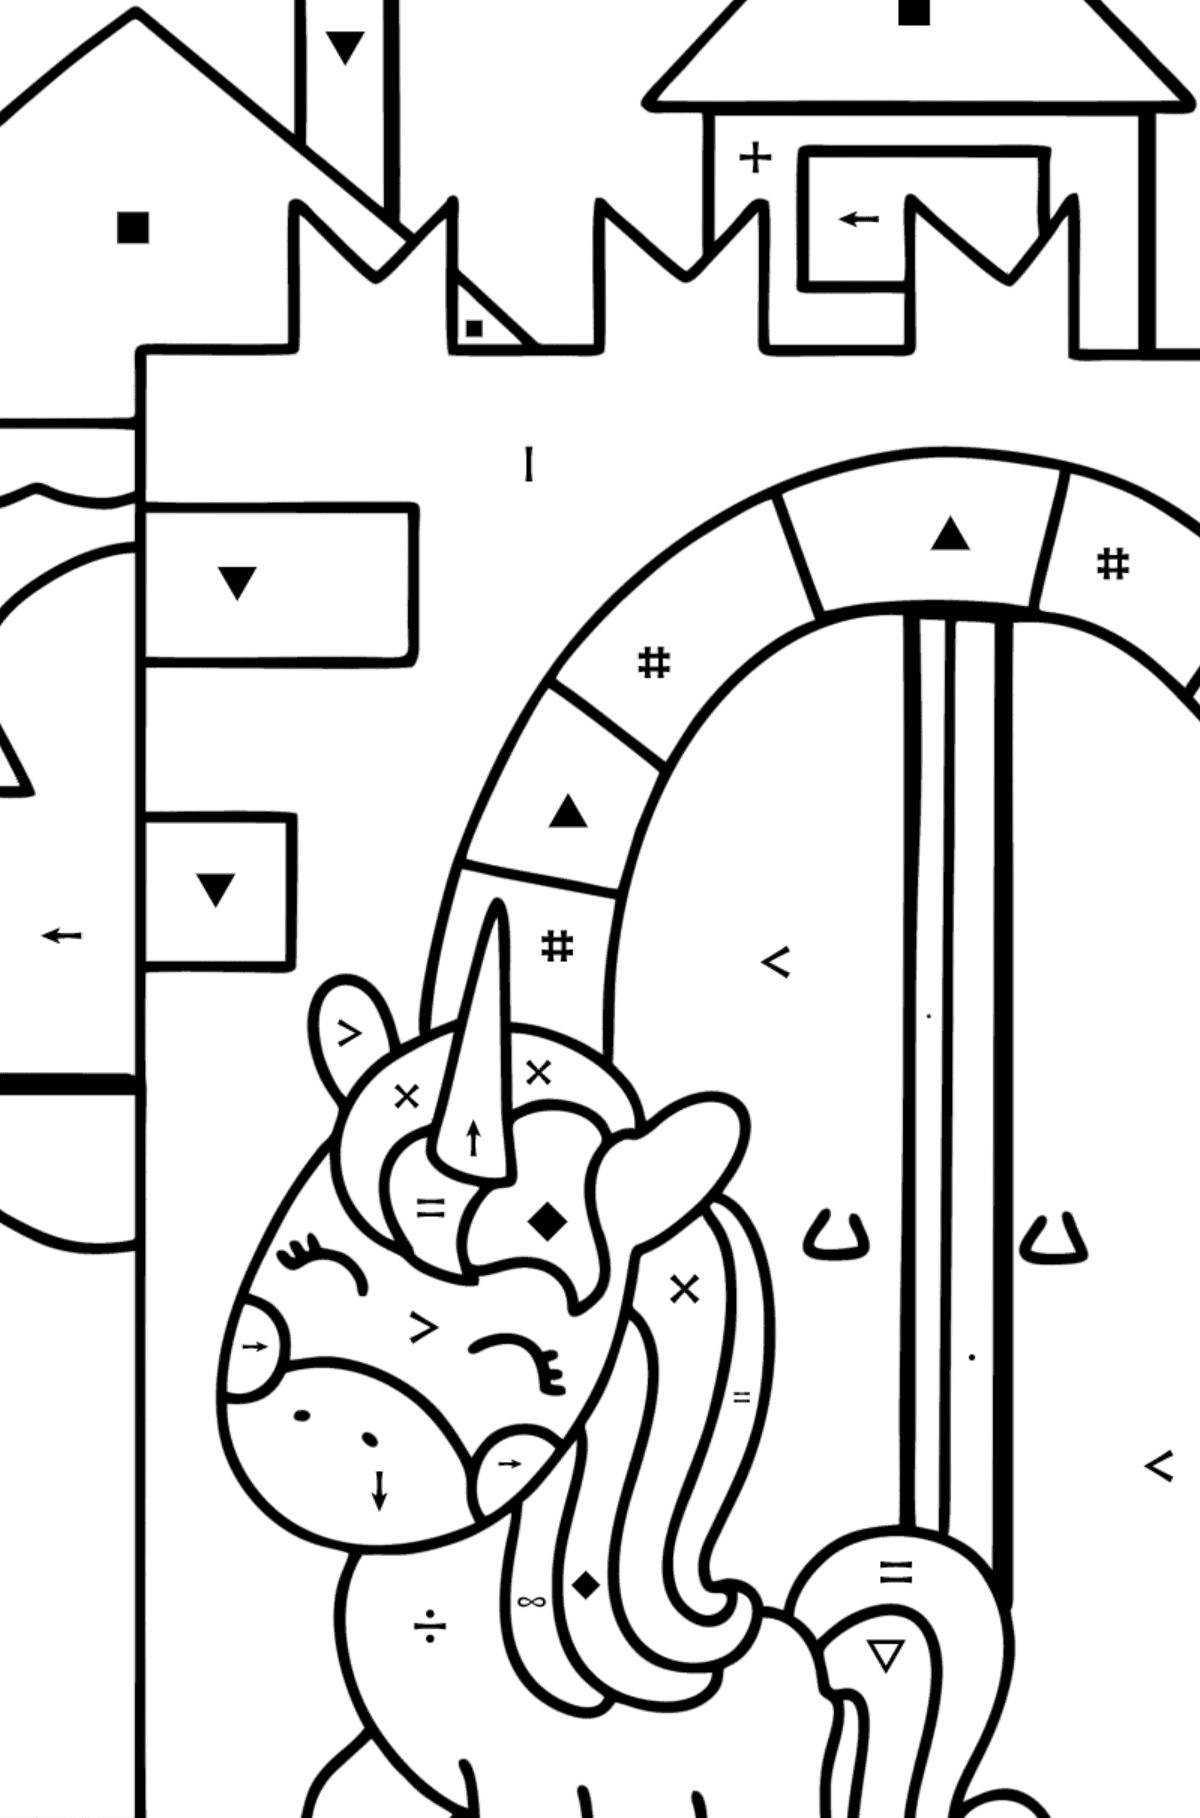 Dreamland coloring page - Coloring by Symbols for Kids